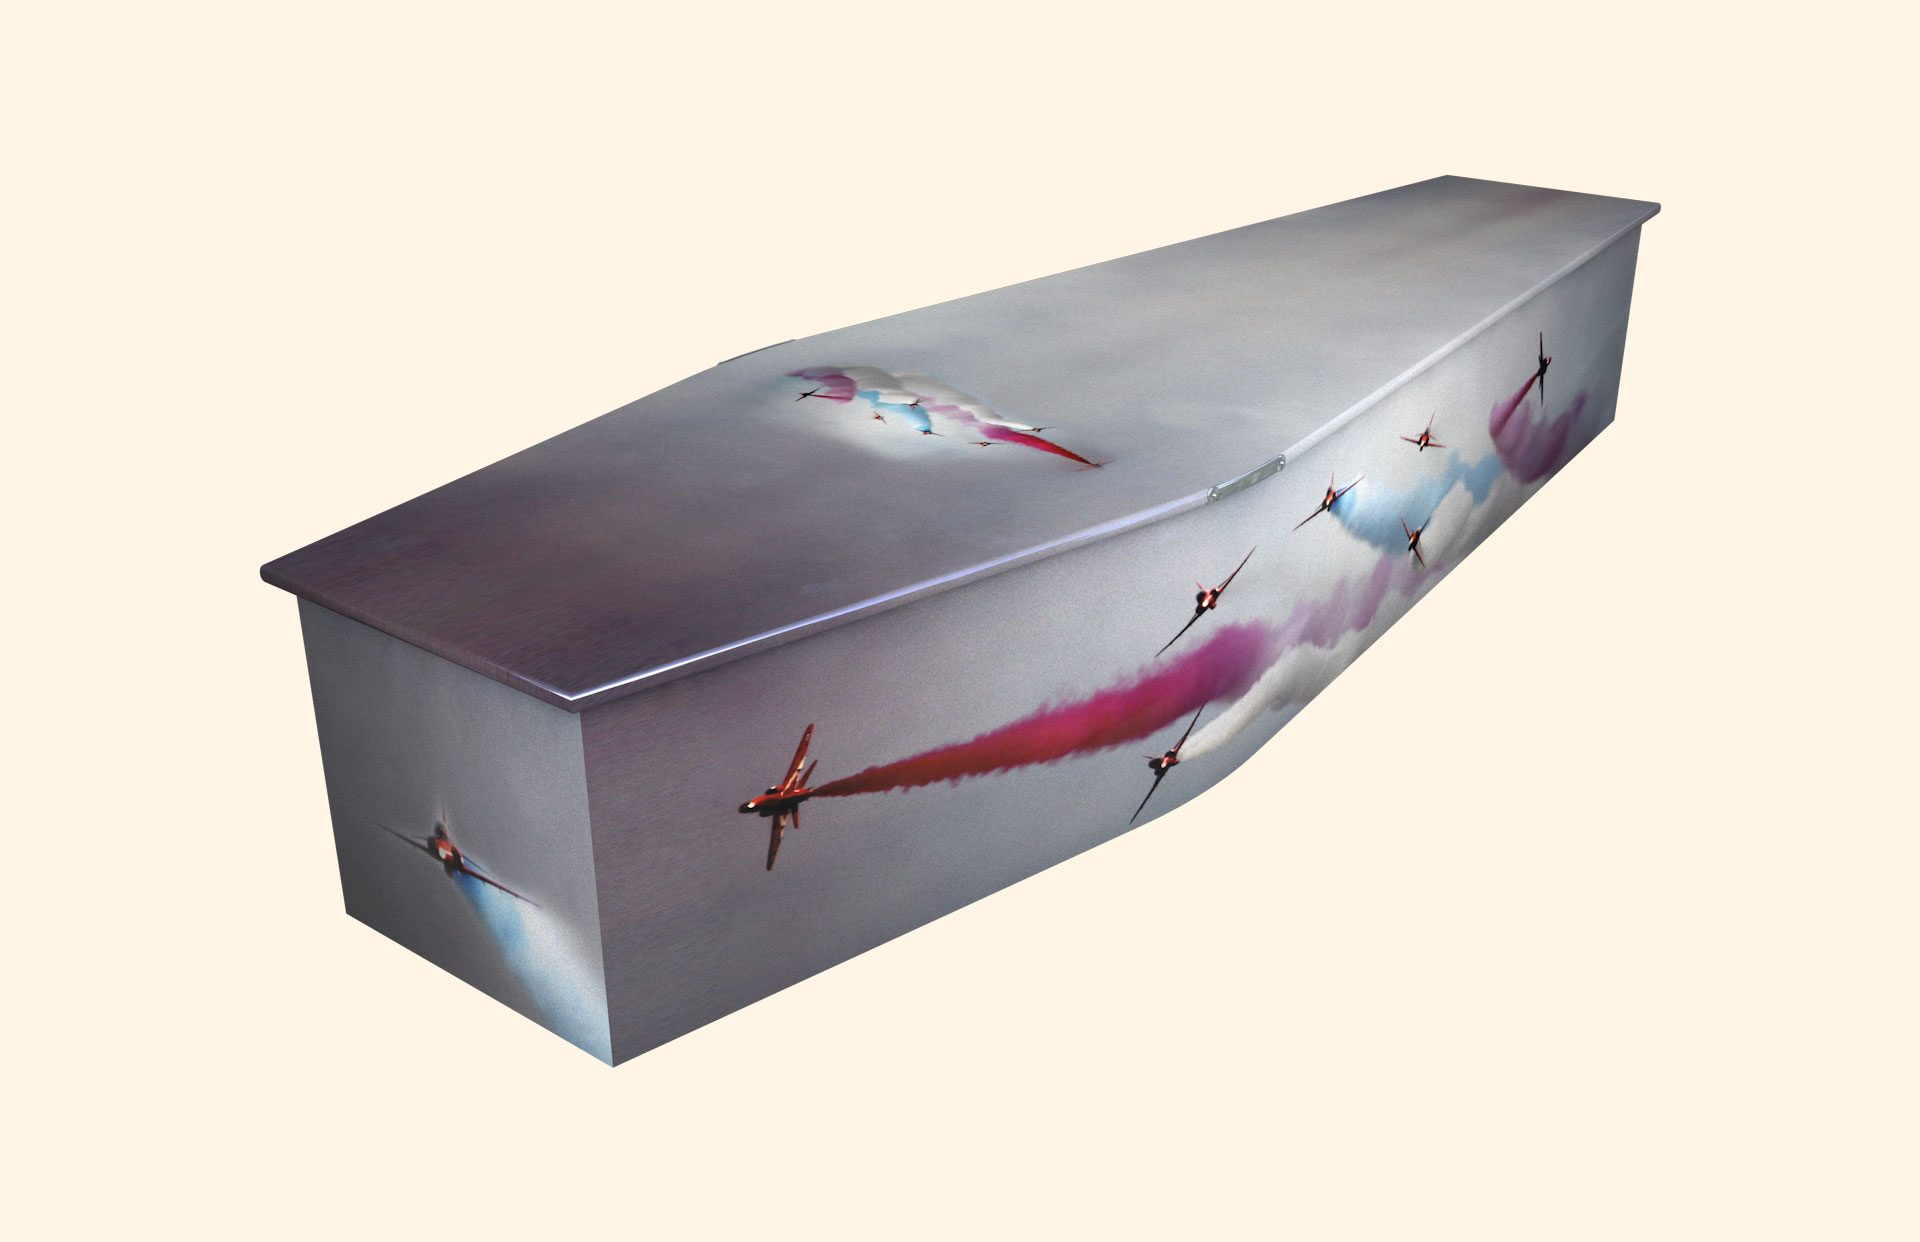 Red Arrows design on a traditional coffin